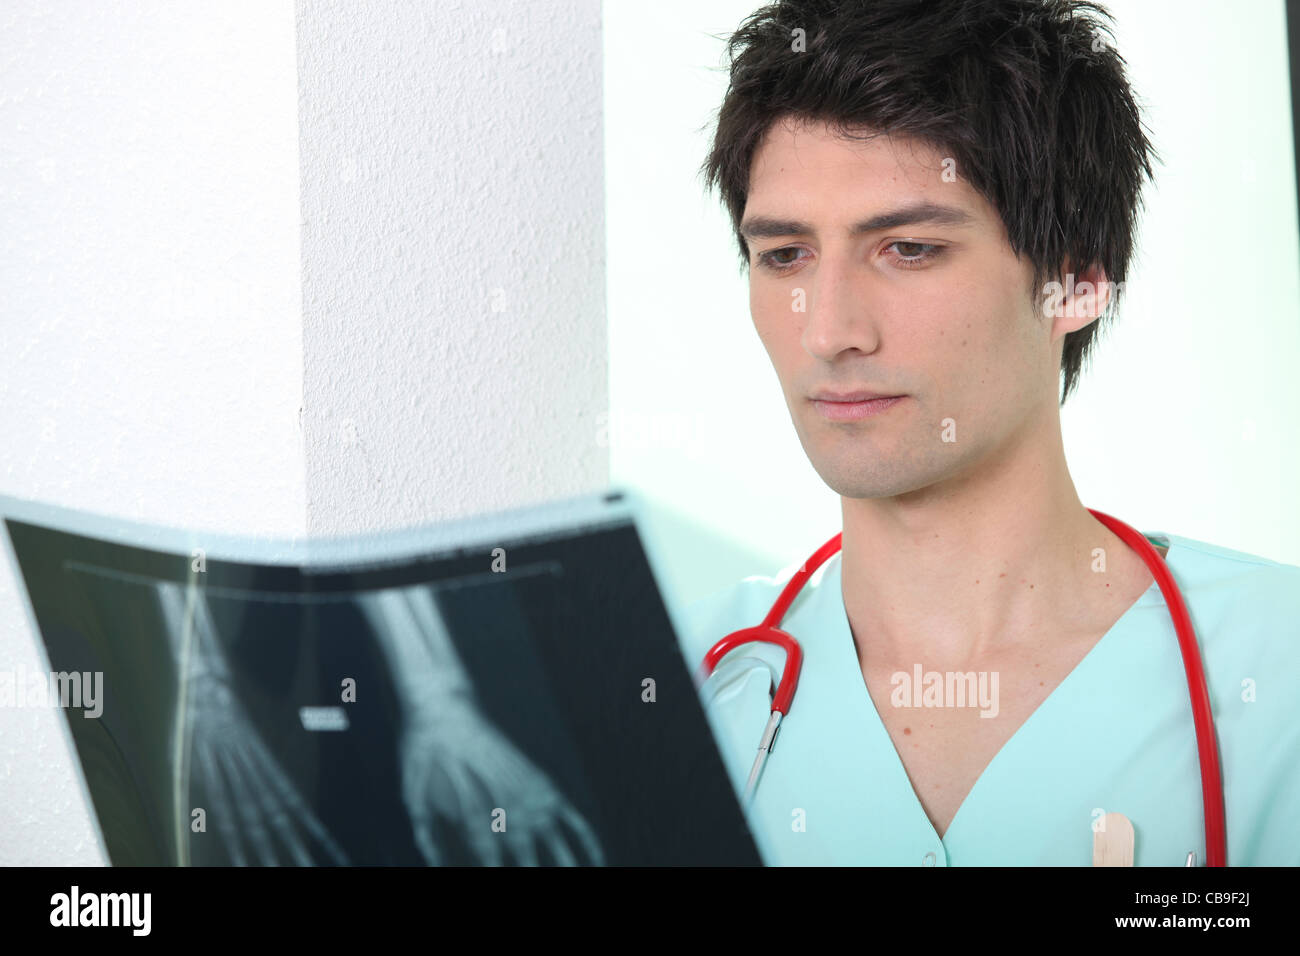 Male nurse looking at x-ray image Stock Photo